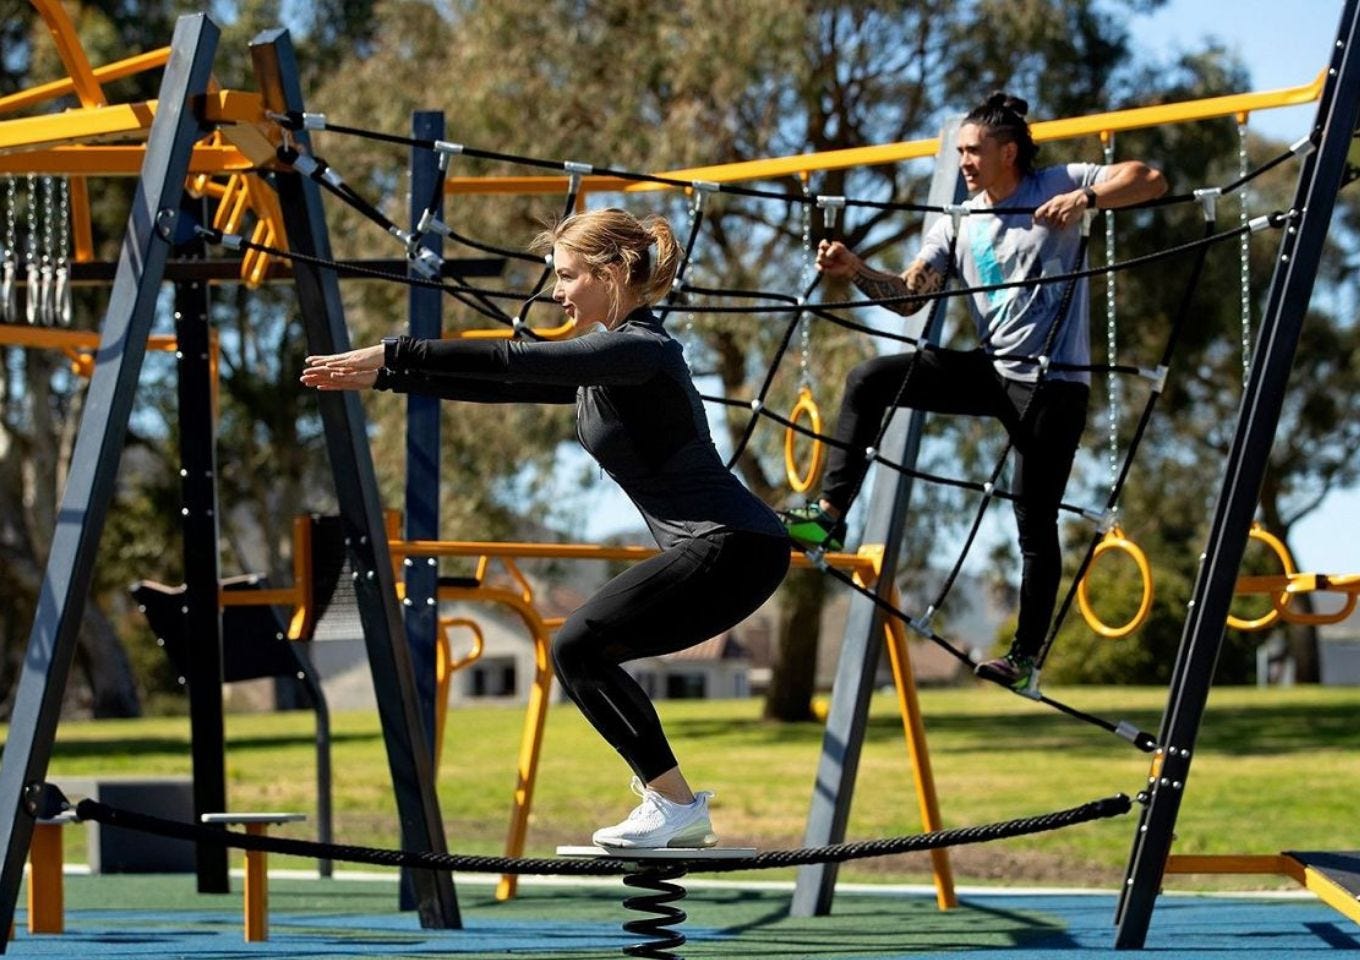 THRIVE Compact Outdoor Fitness Systems